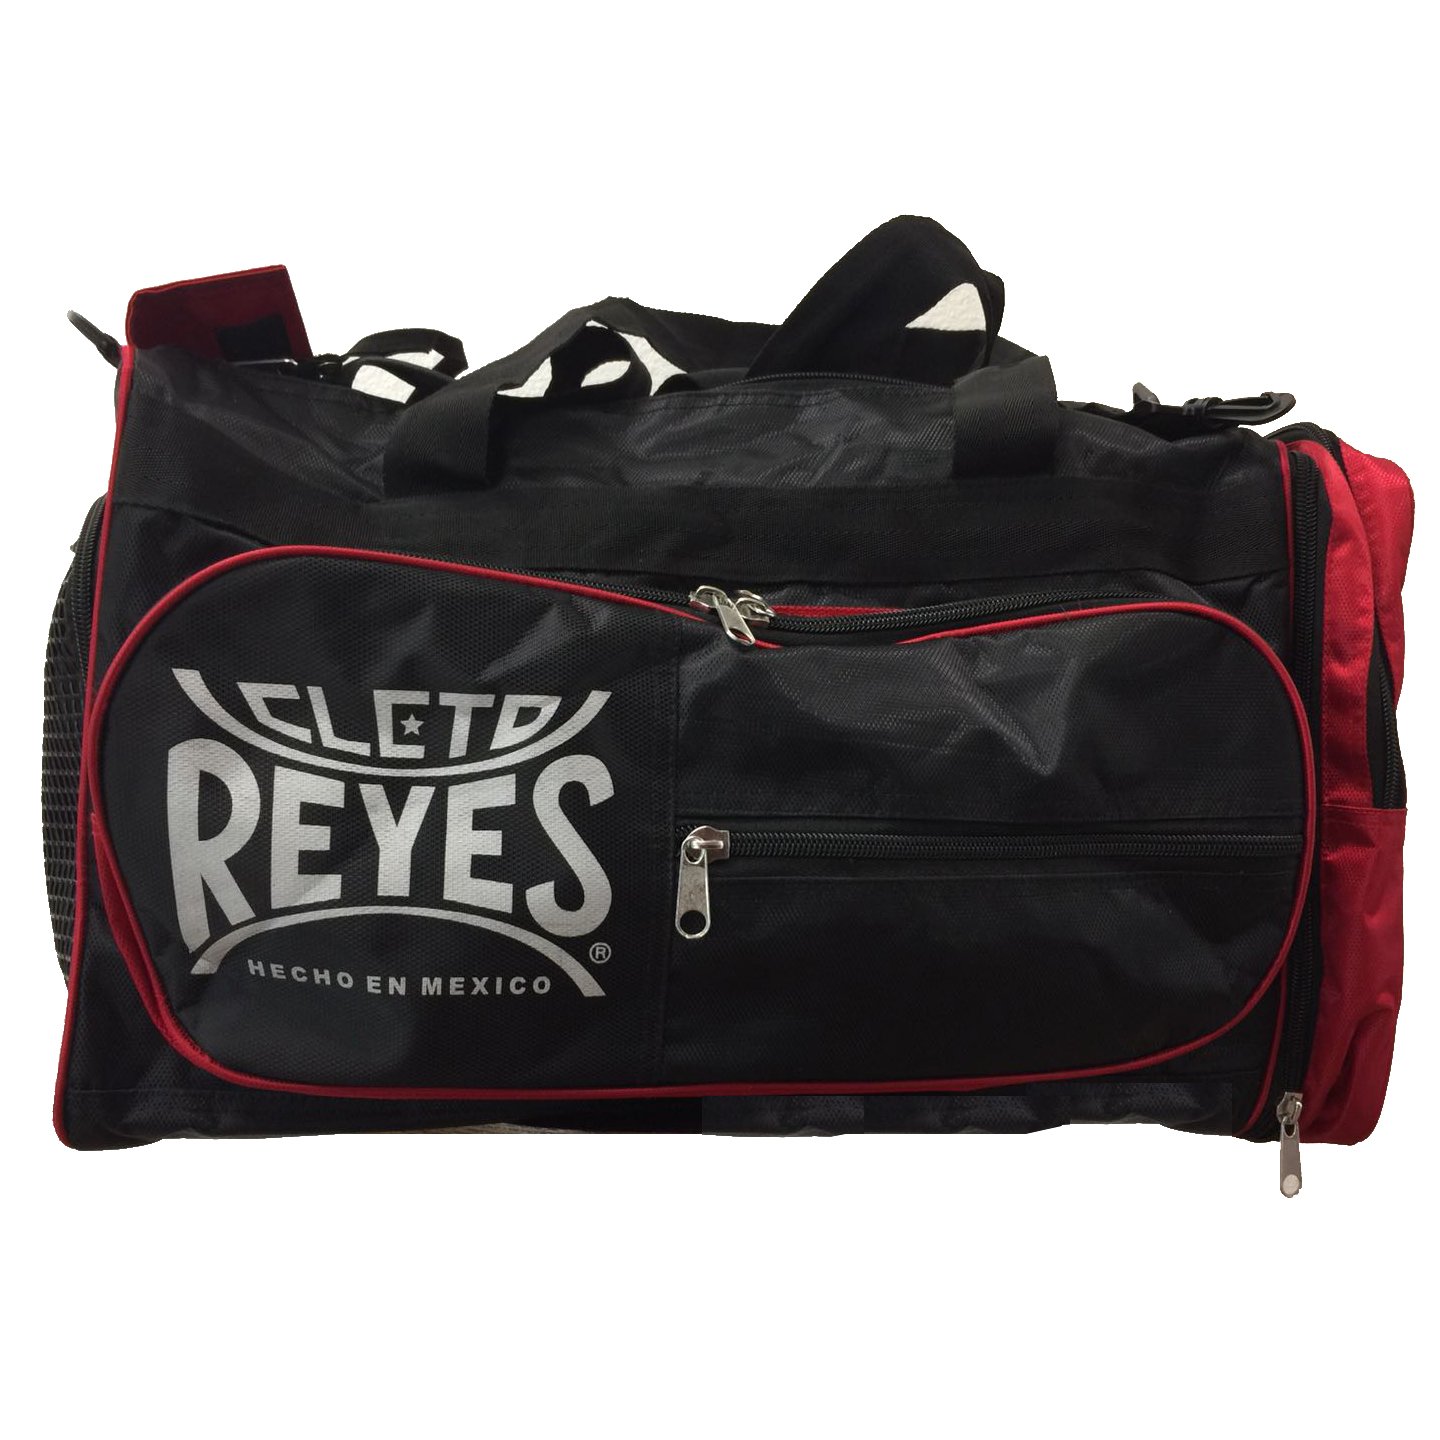 Cleto Reyes Nylon Gym Bag Reviewed & Rated in 2019 | FightingReport